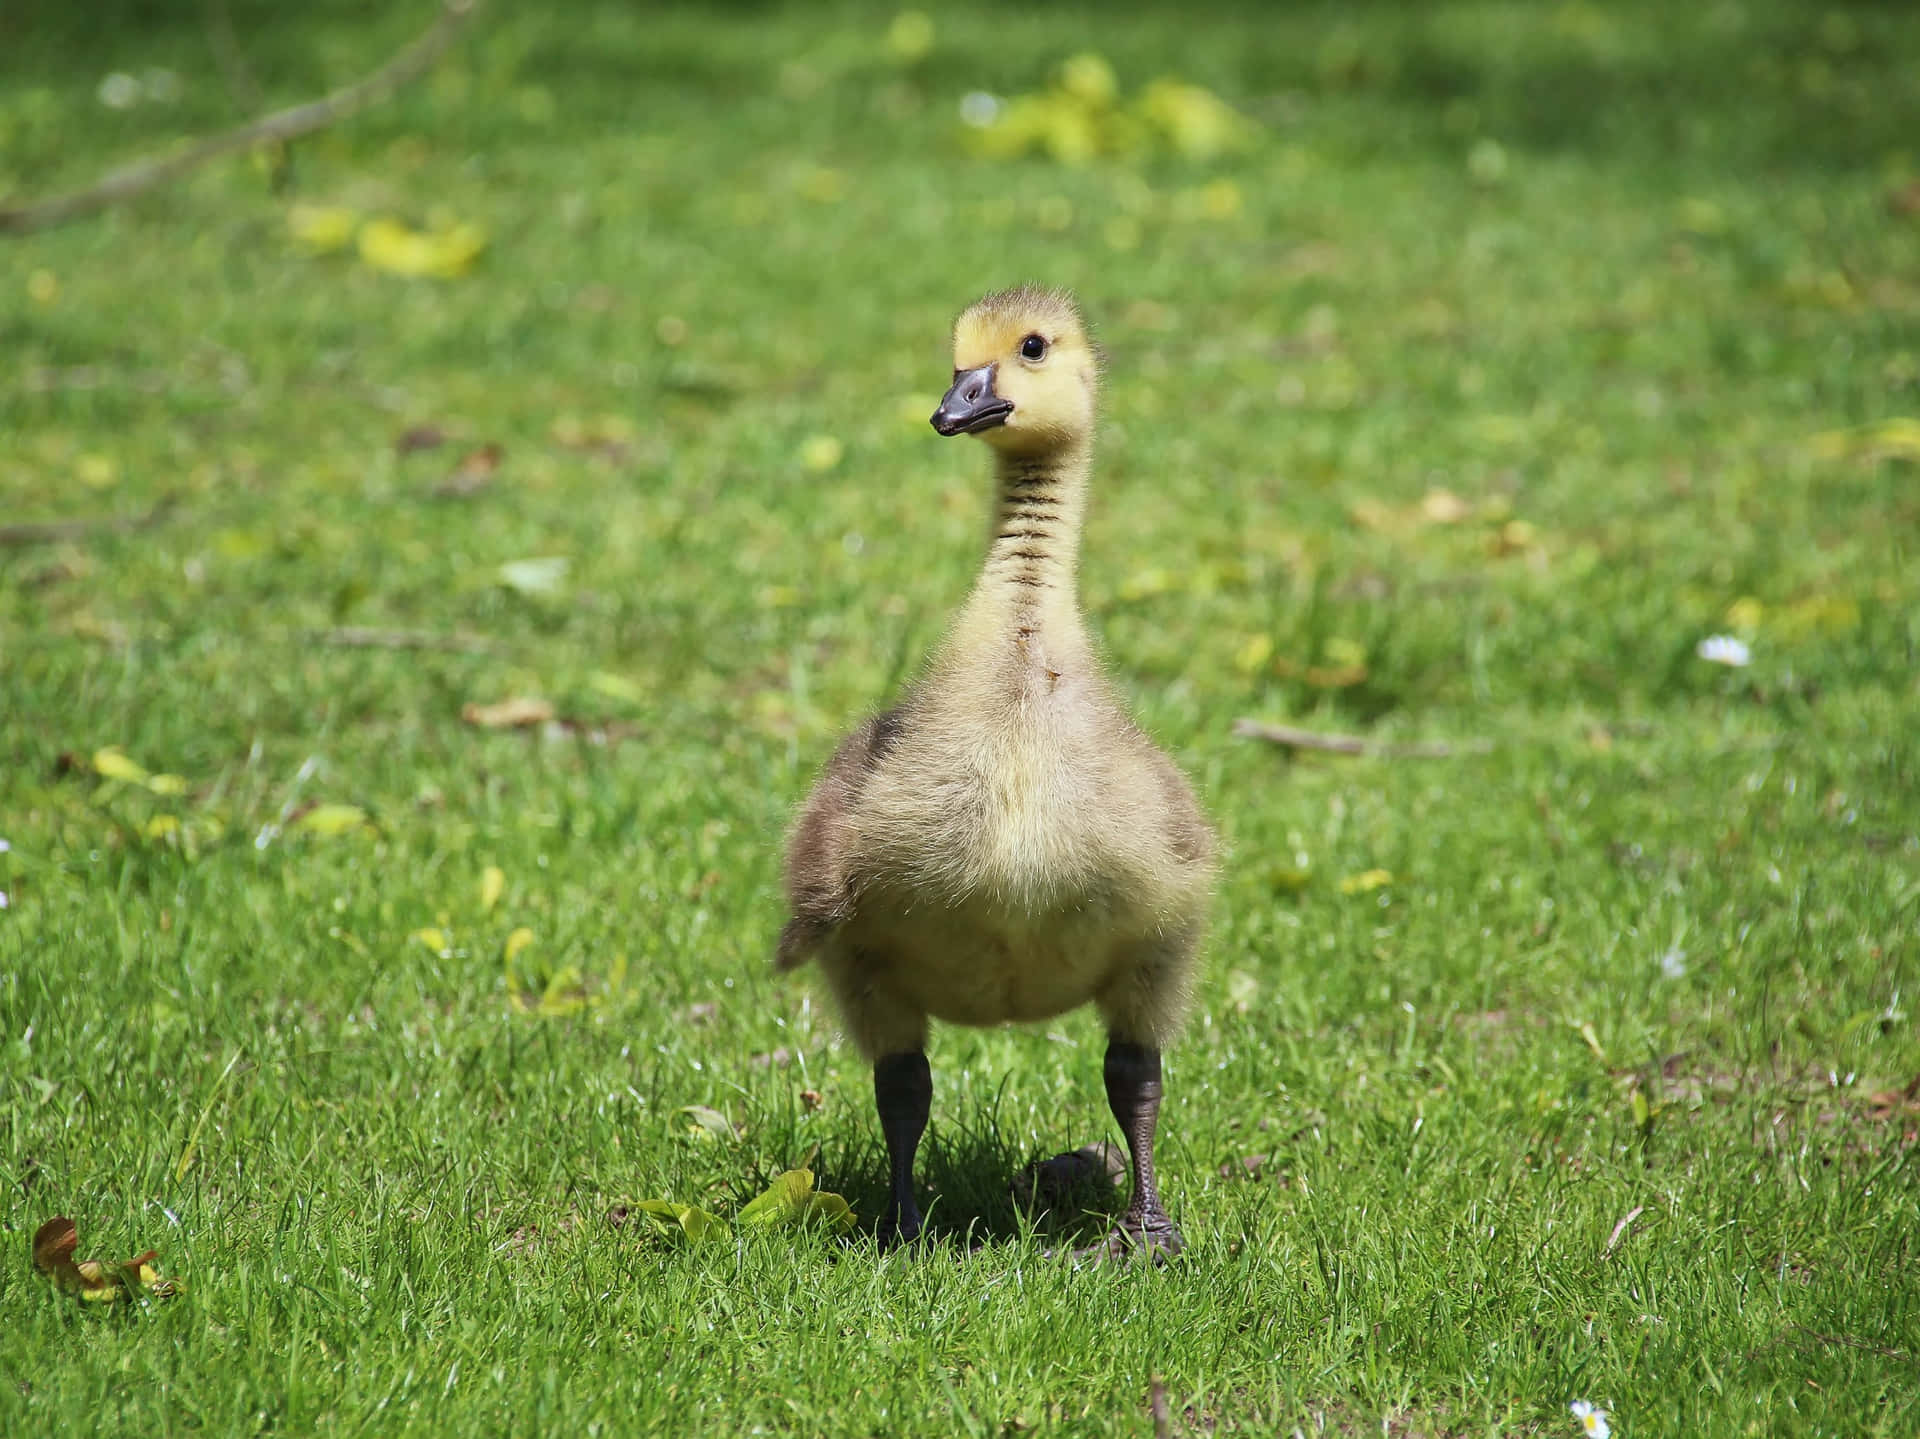 Cute Duck Wandering On The Grass